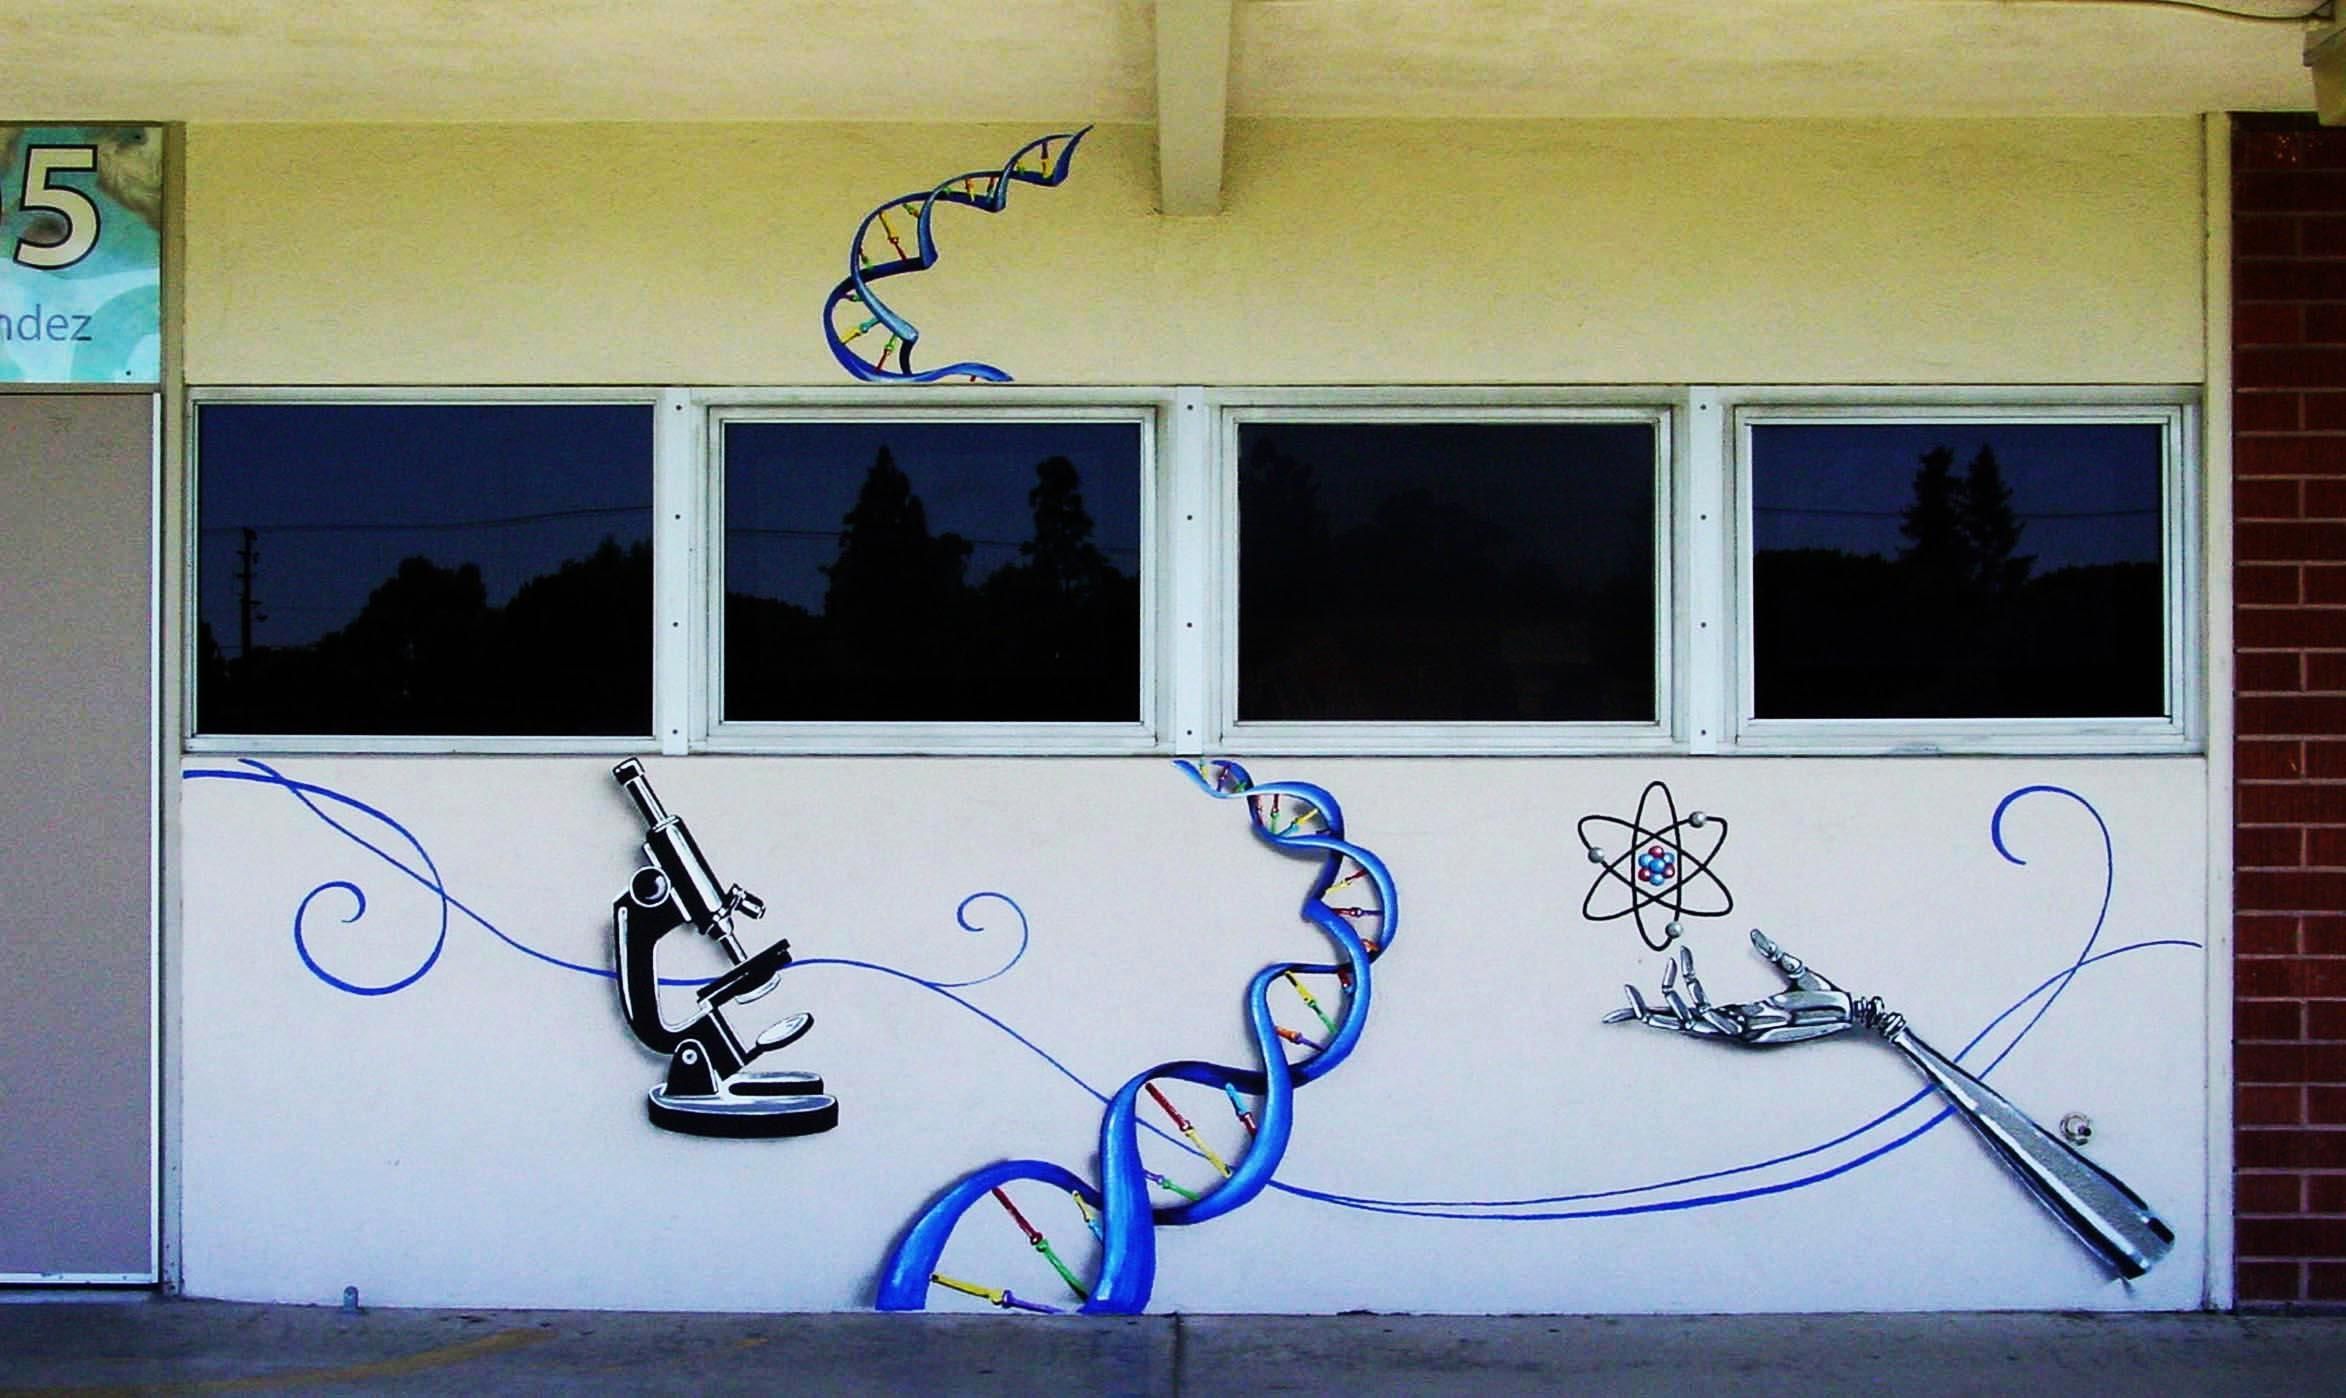 Scientific Mural; Microscope, Dna, Atom, And Robotic Arm | Sugarmanart With Regard To Dna Wall Art (View 3 of 20)